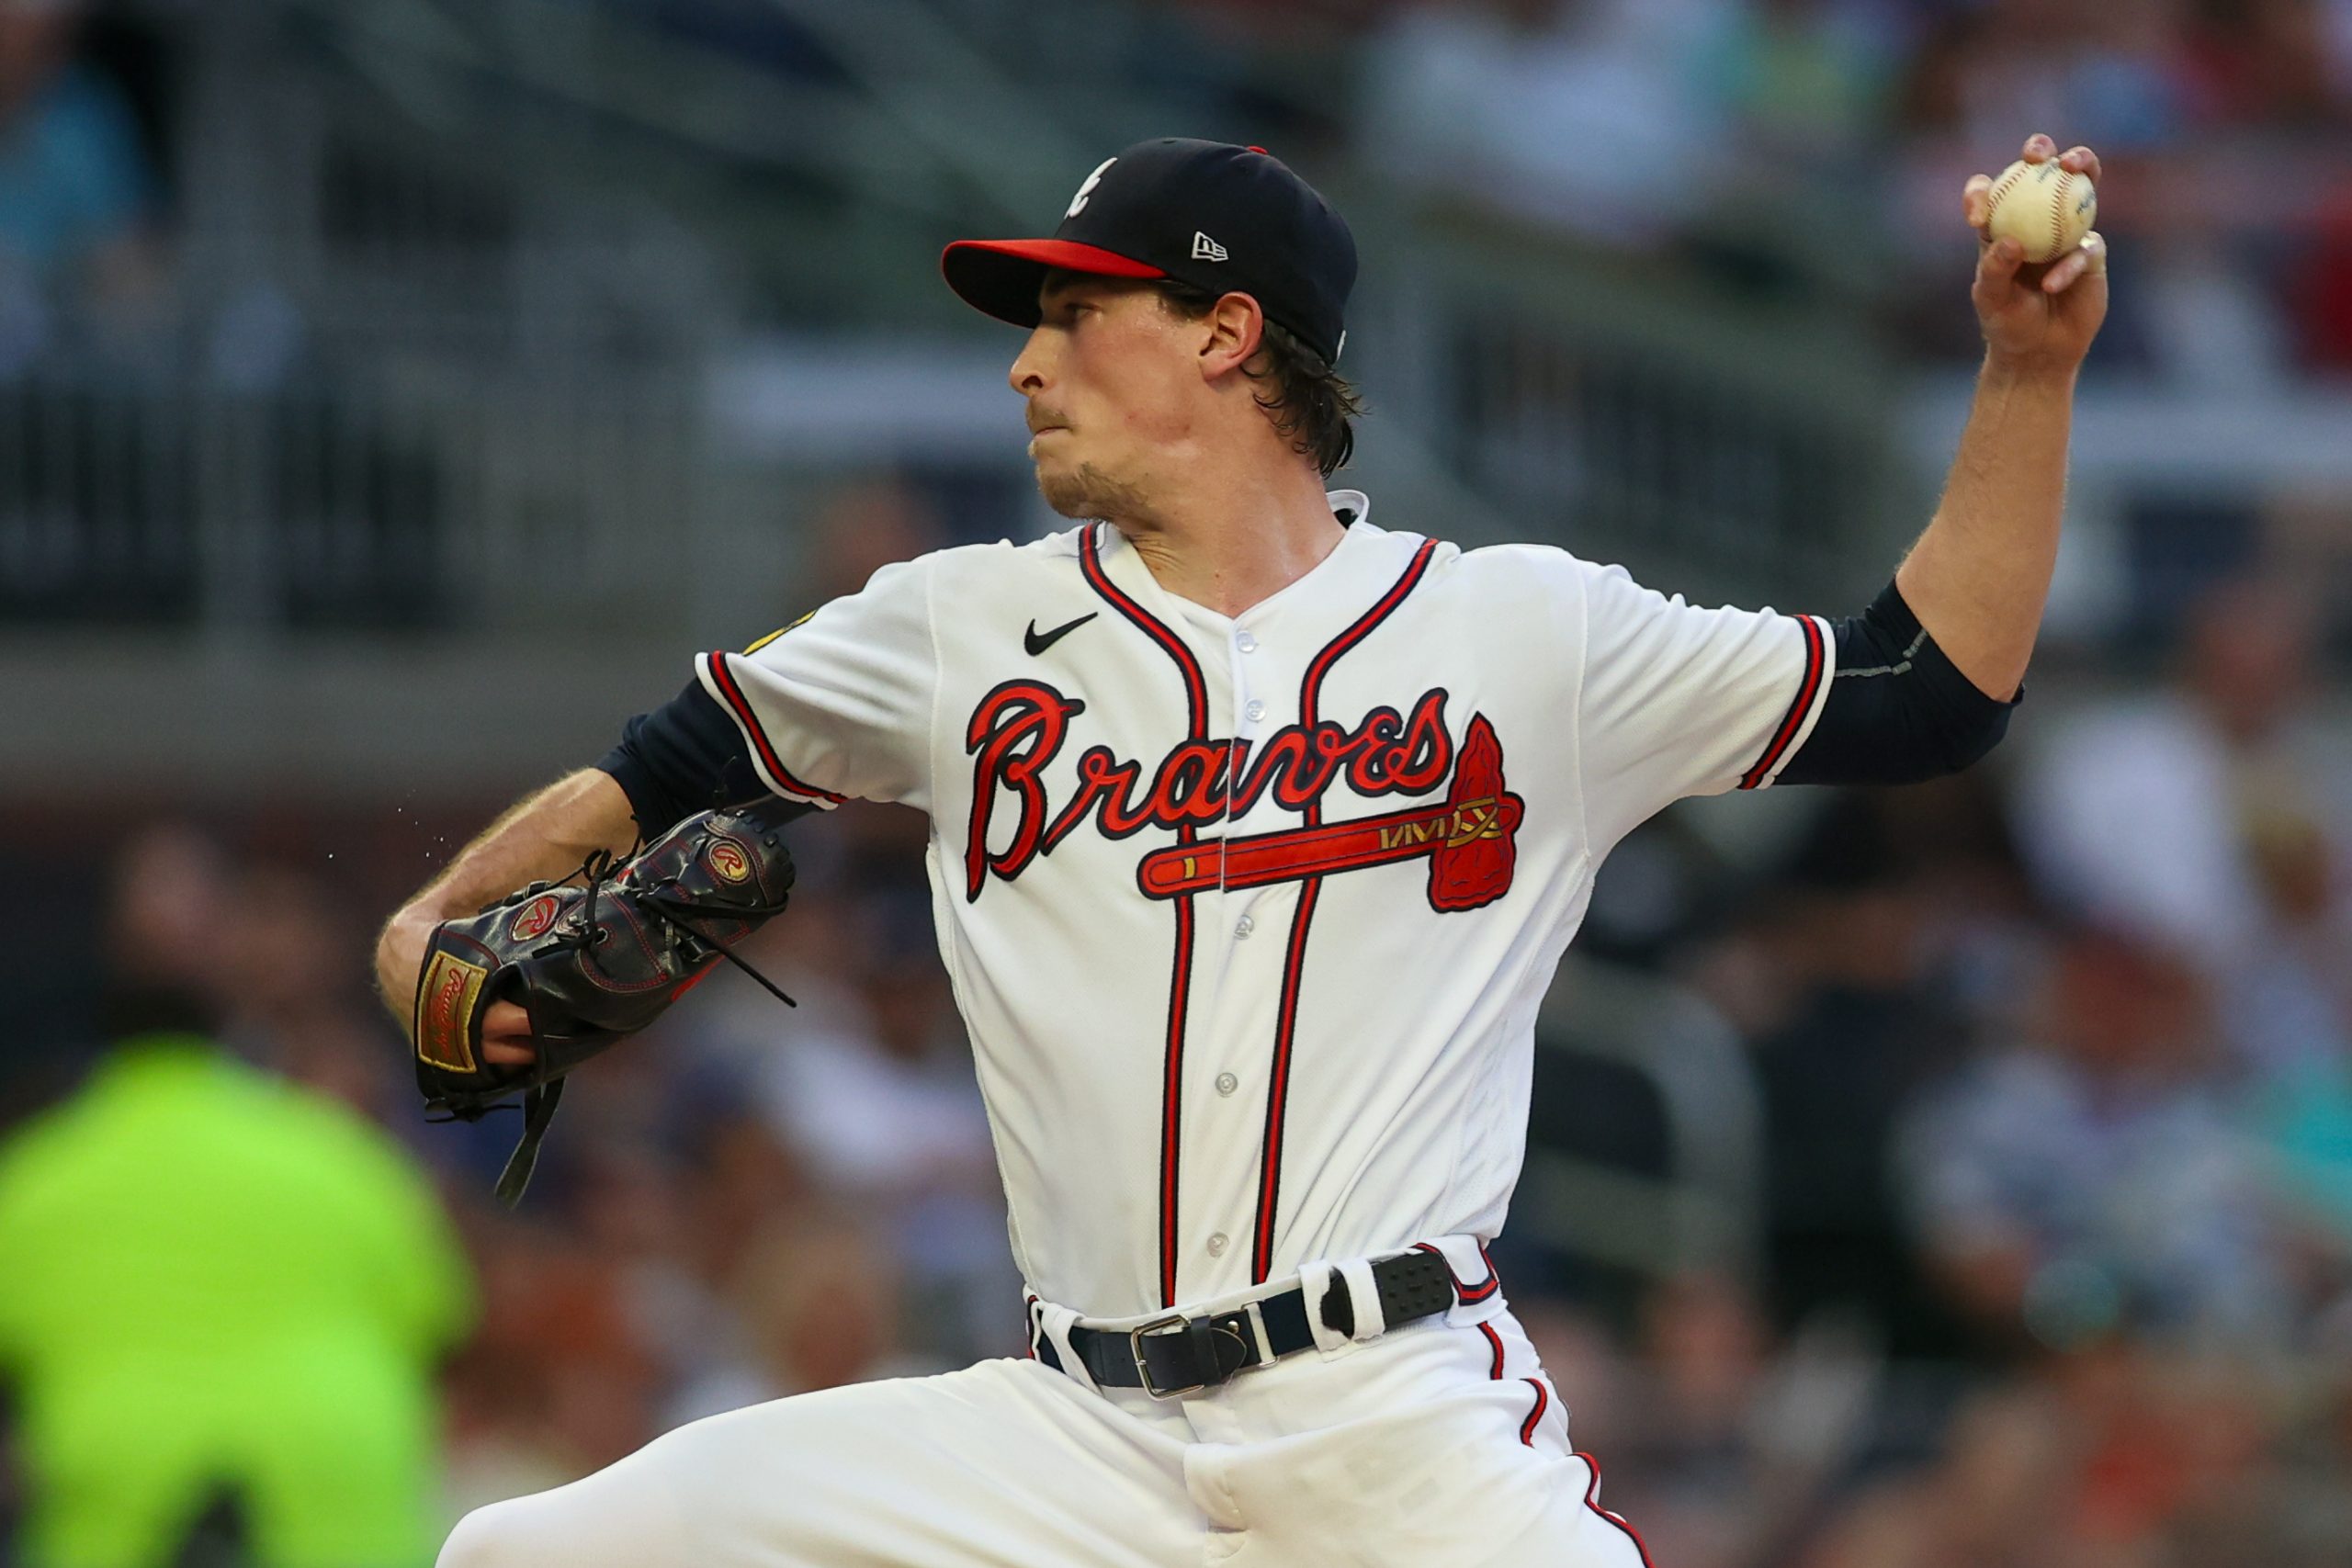 Braves Pitching Now A Big Problem For Opponents